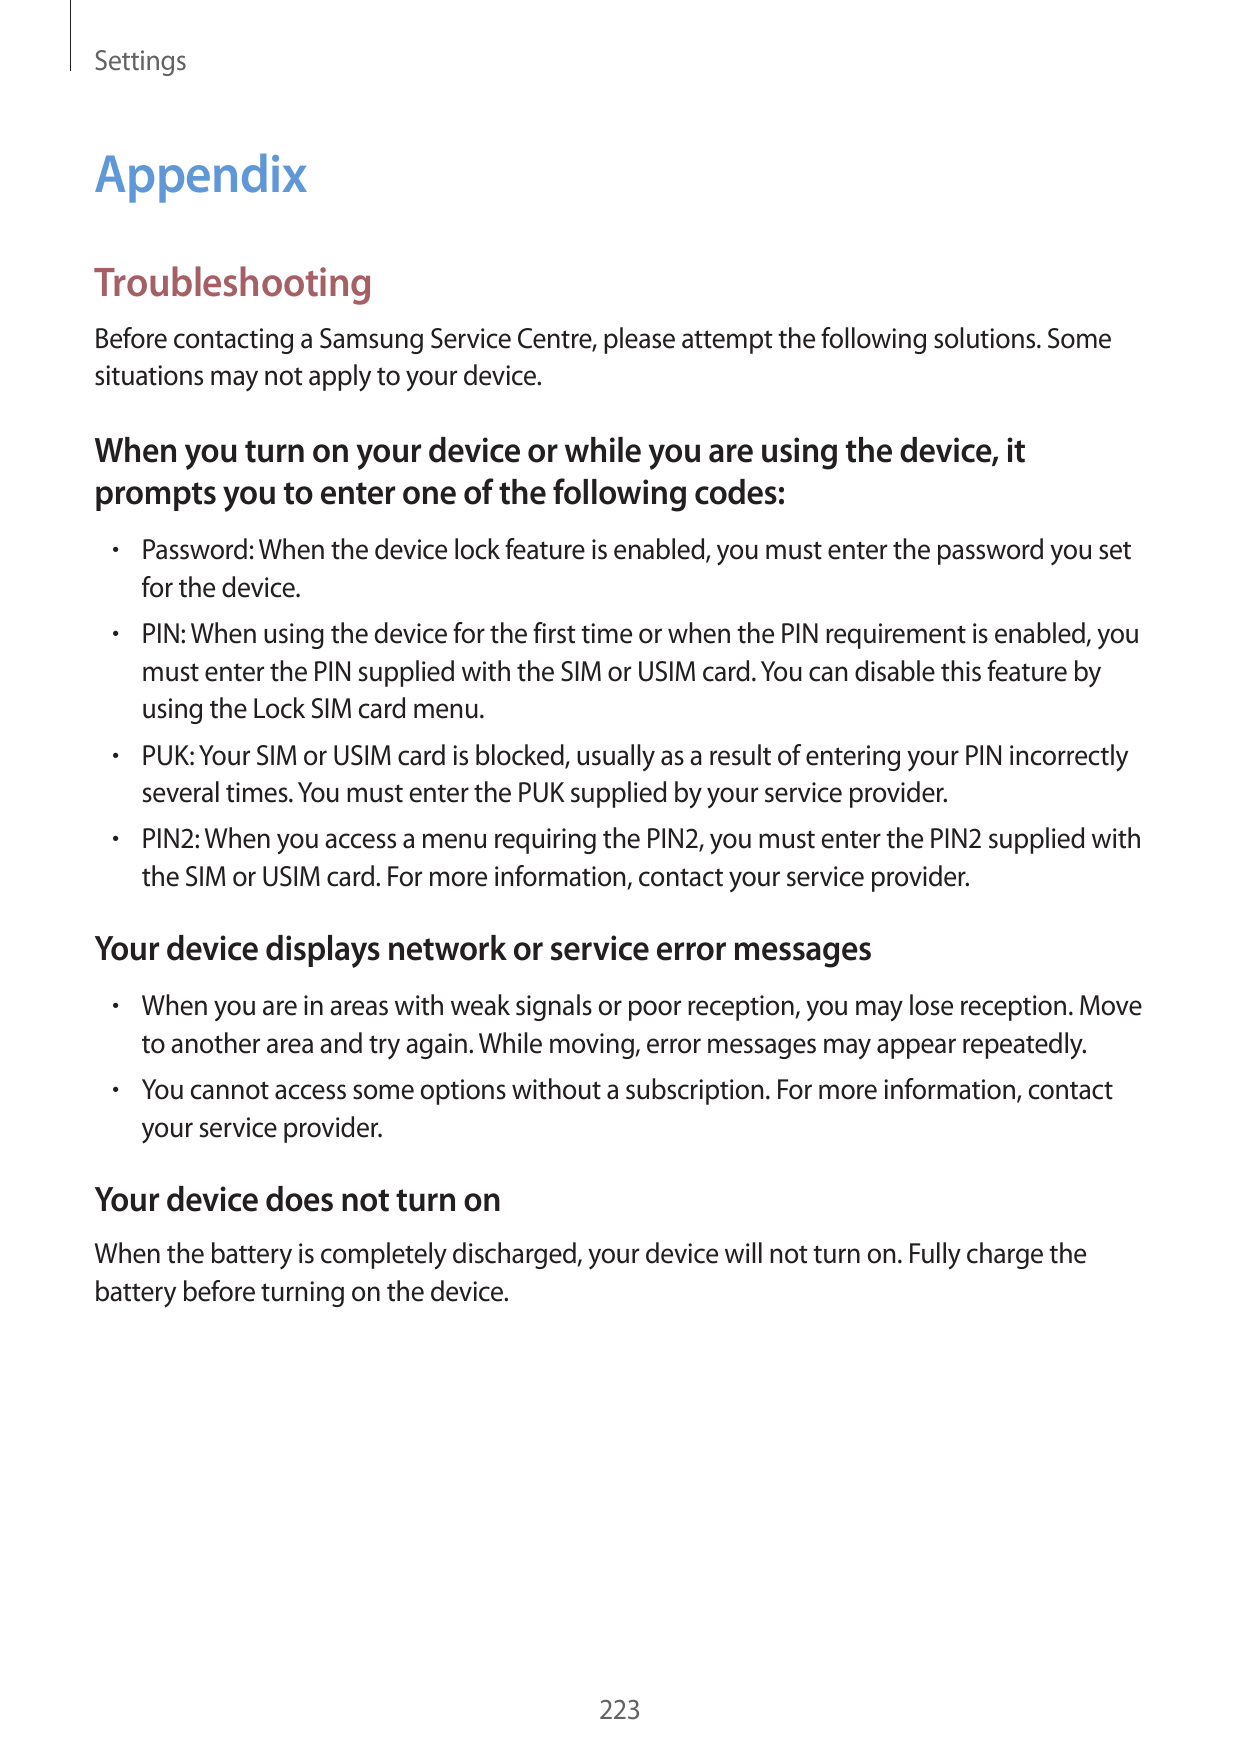 SettingsAppendixTroubleshootingBefore contacting a Samsung Service Centre, please attempt the following solutions. Somesituation